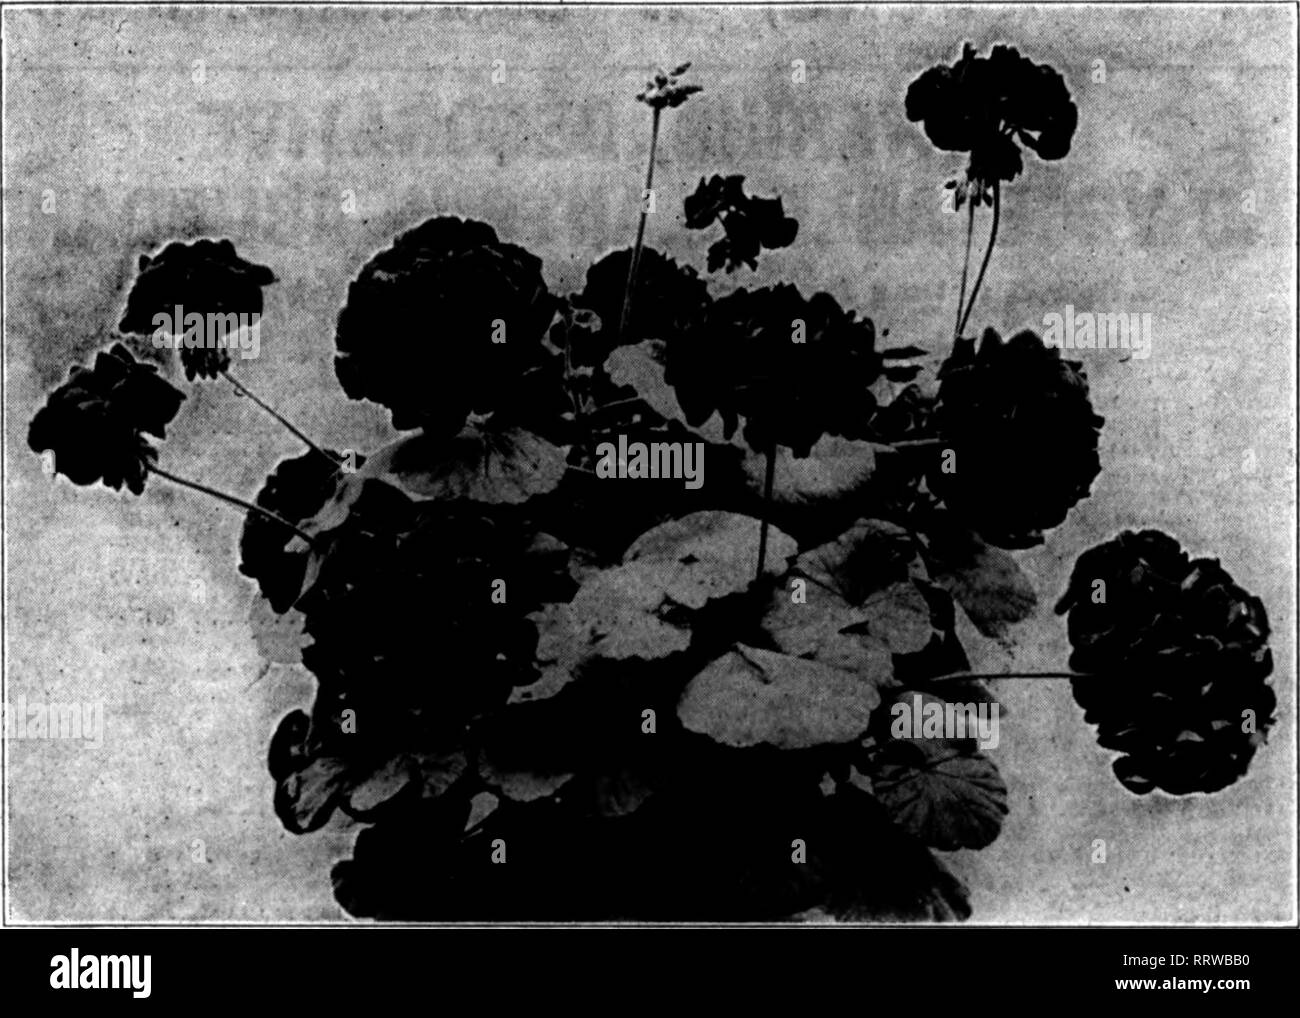 . Florists' review [microform]. Floriculture. May 1, 1913. The Rorists'Review 76 BEDDING PLANTS The Planting Season Is drawing very near, so you had better order your supply NOW and get the pick of our stock 100. 3.00 2.50 5.00 8.00 100 1000 Musa Ensete (Abyssinian Banana), strong, 4-inch, per dozen $2.00 Petunias, single fringed, all colors, from choice seed, 3-lnch 16.00 .... 4-inch 8.00 Ricinus (Castor Bean), strong, 4-inch, per doz., $1.50 Altemantheras, red and yellow, strong, 2%-inch $2.50 Asparagus Sprengerl and Plu- mosus Nanus, 2%-inch, strong Ageratnm, dwarf blue, 2i,-inch. Ageratum Stock Photo